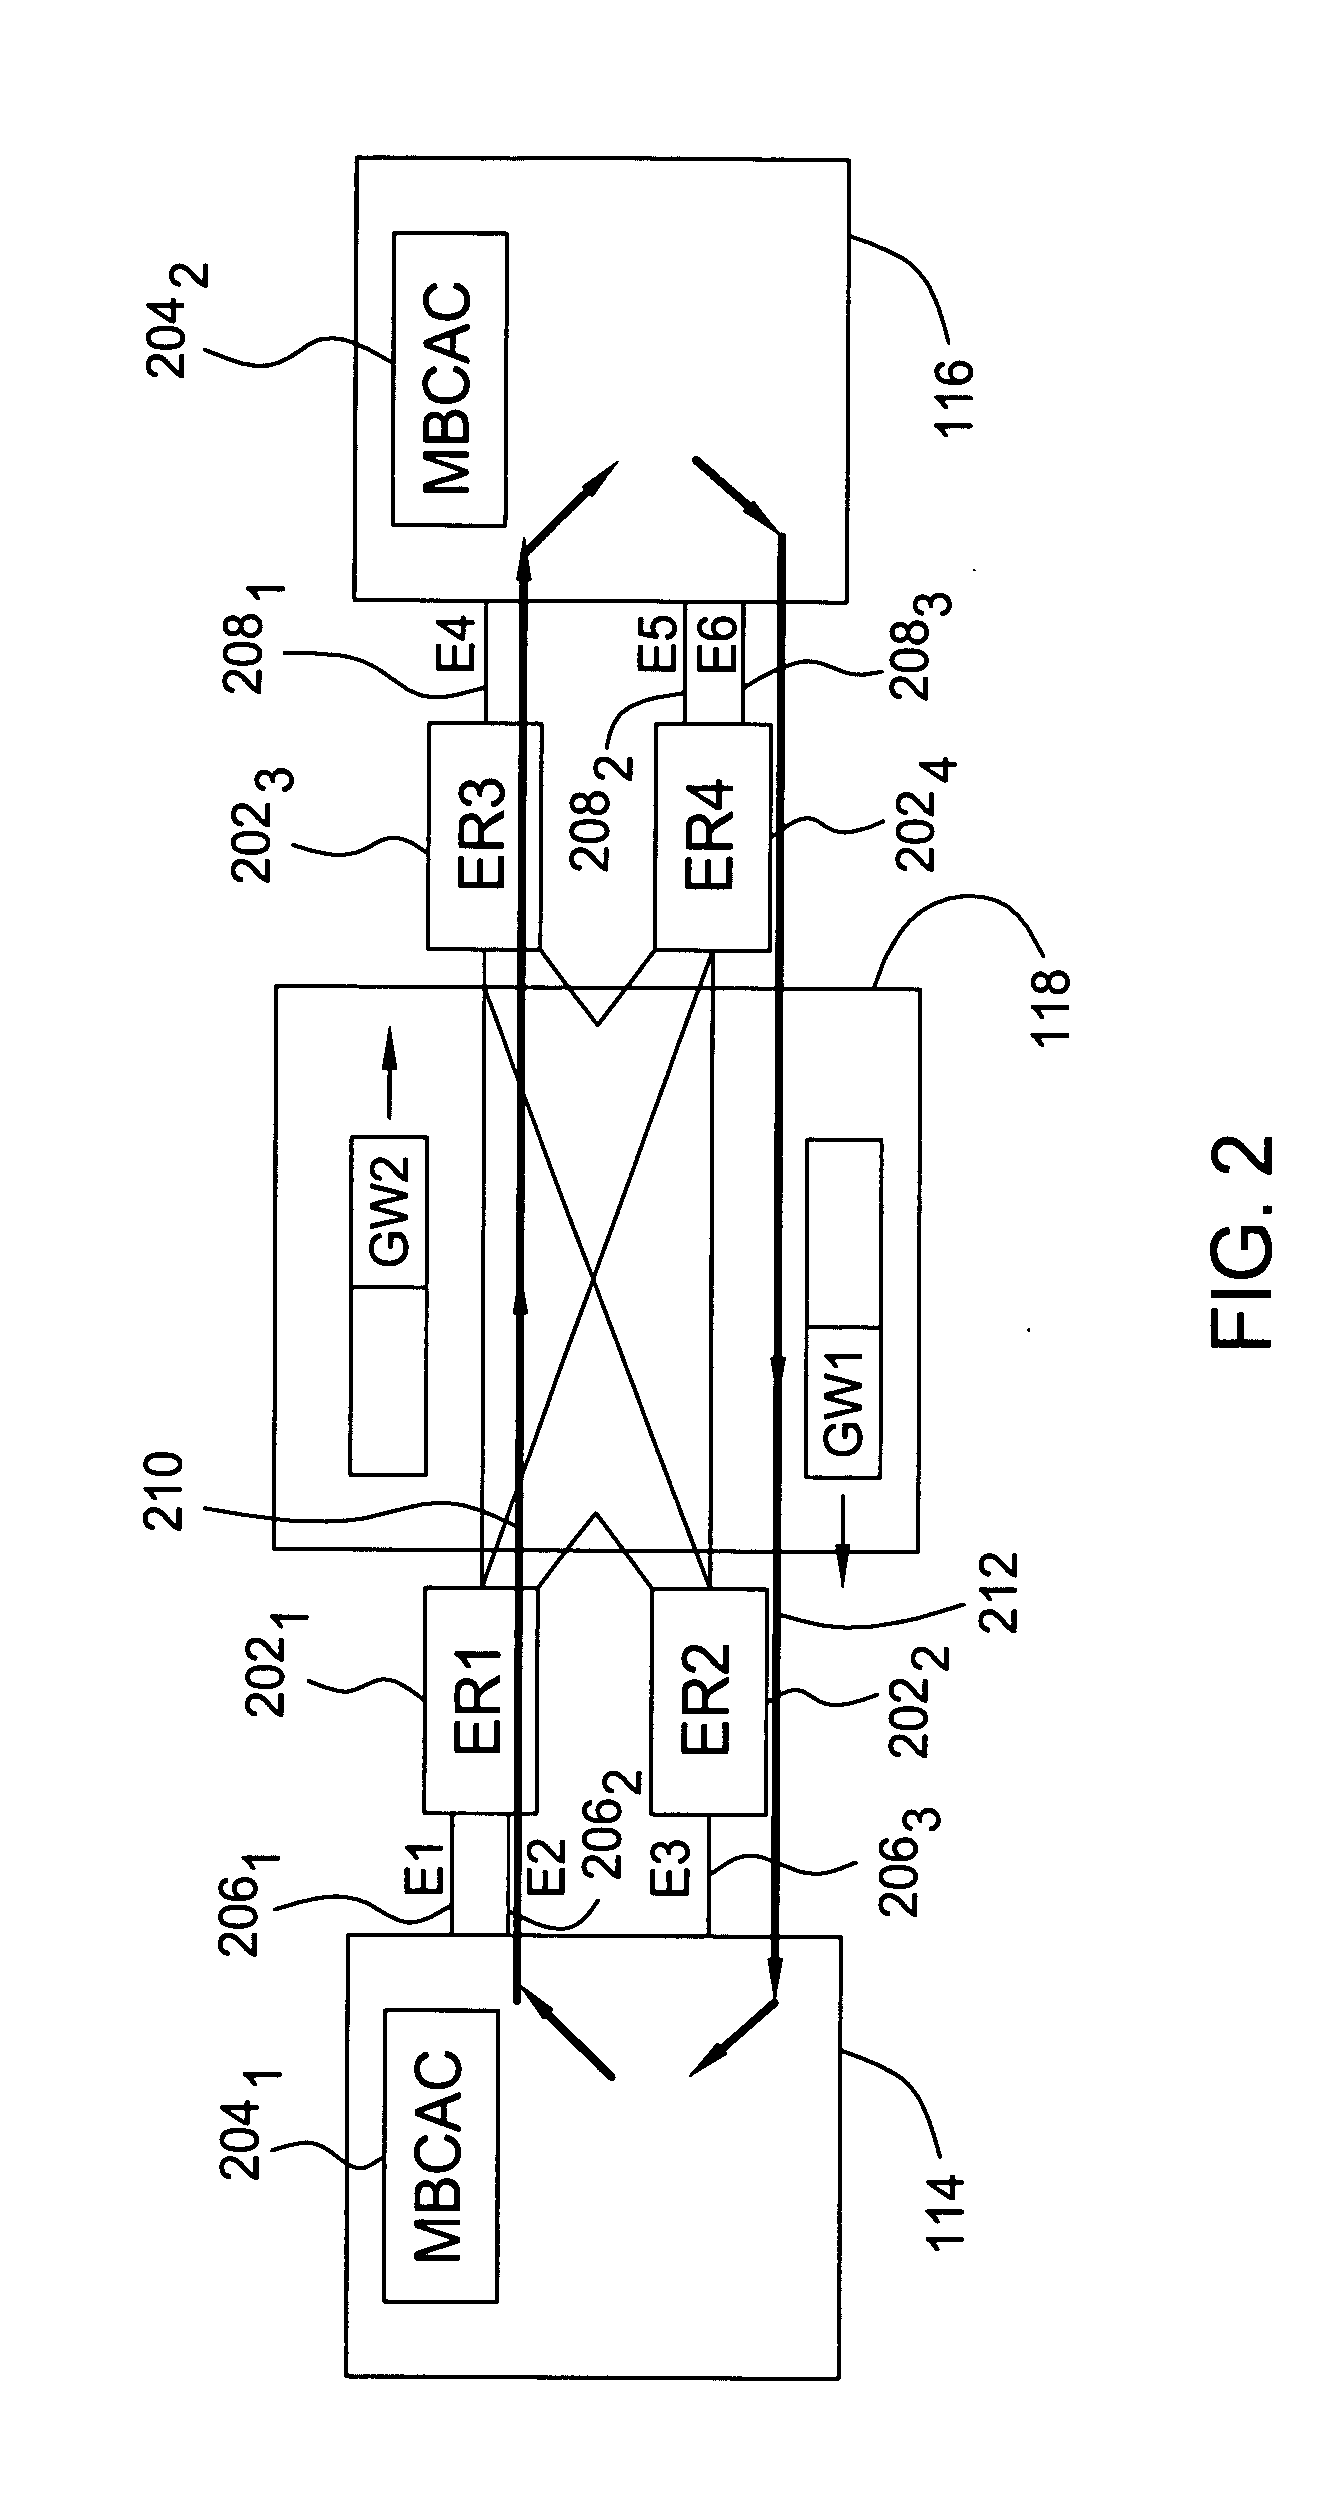 Method and apparatus for management of voice-over IP communications